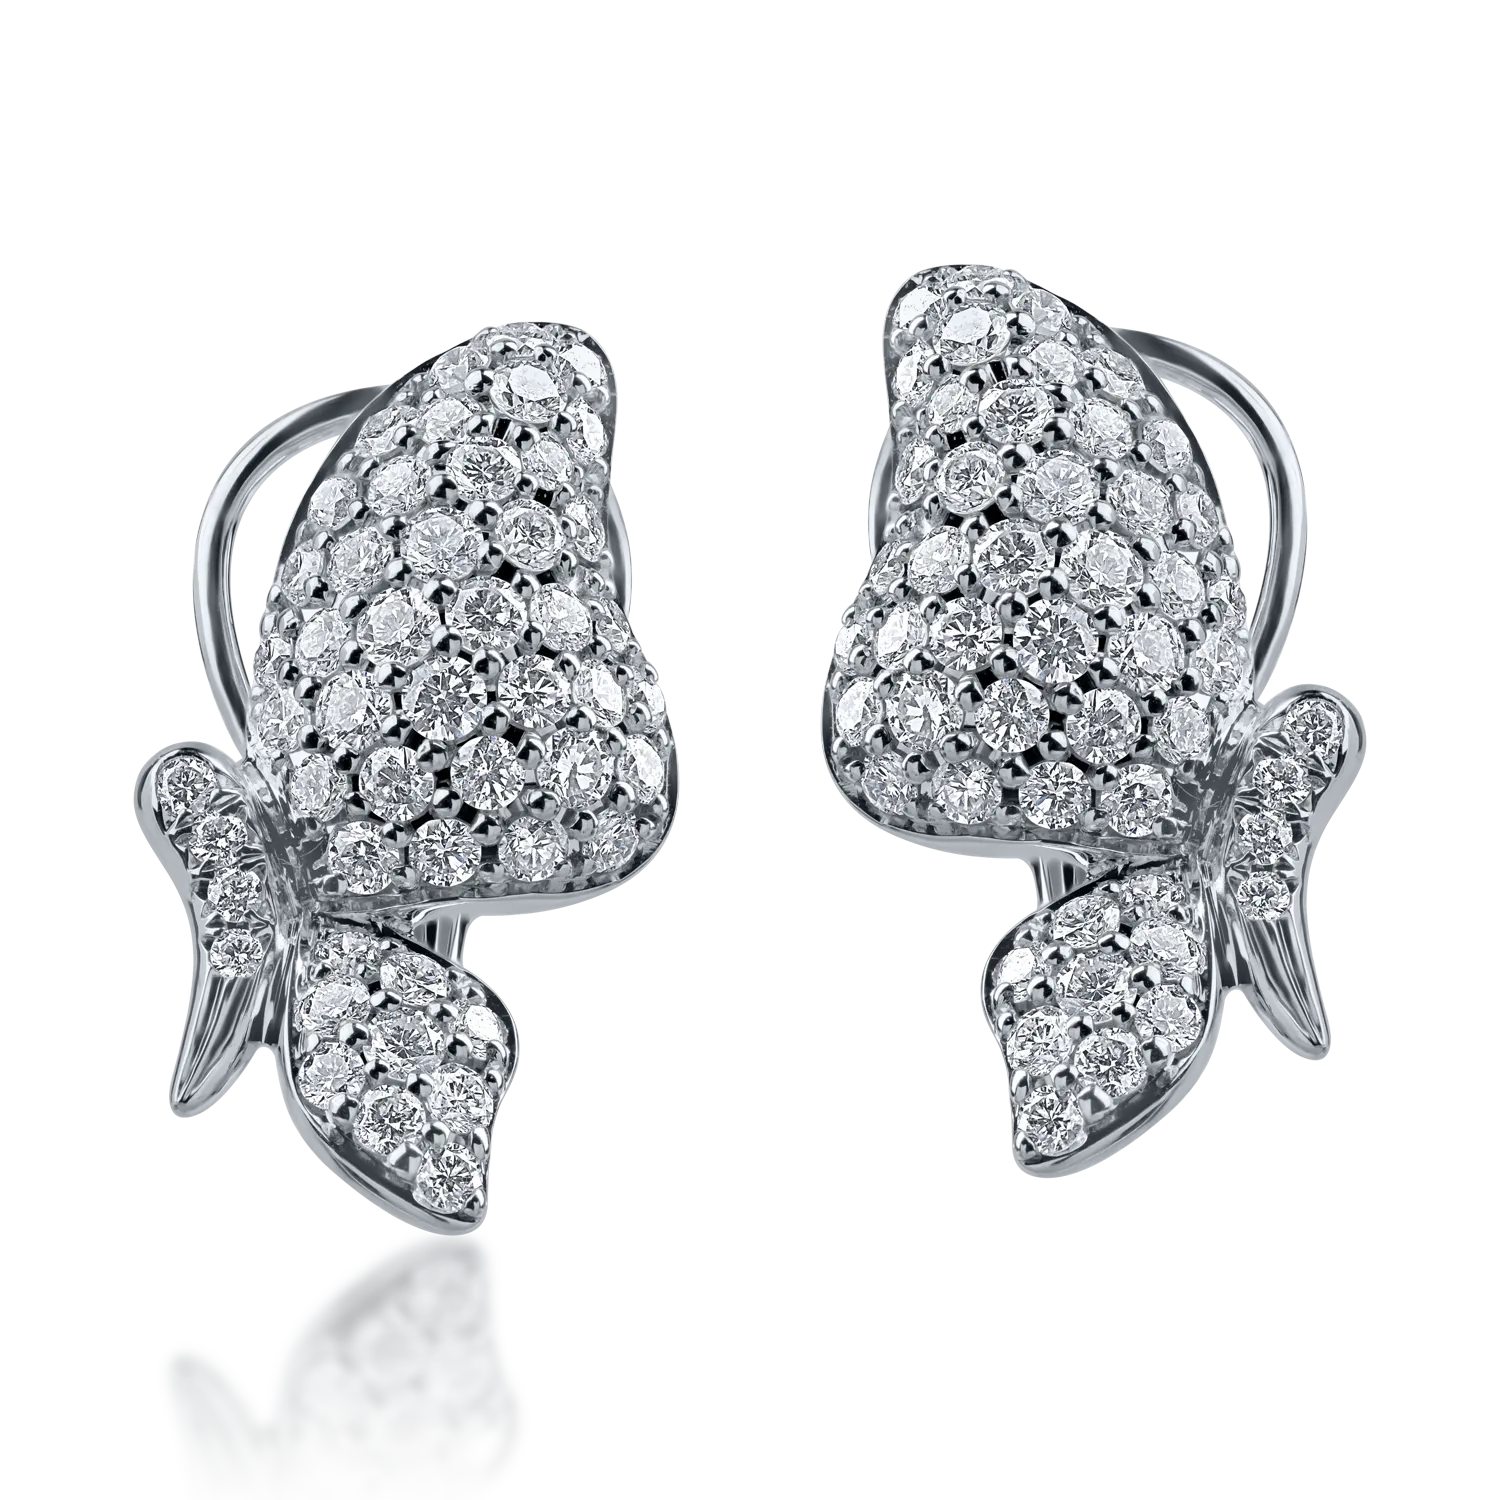 White gold earrings with 1.13ct diamonds